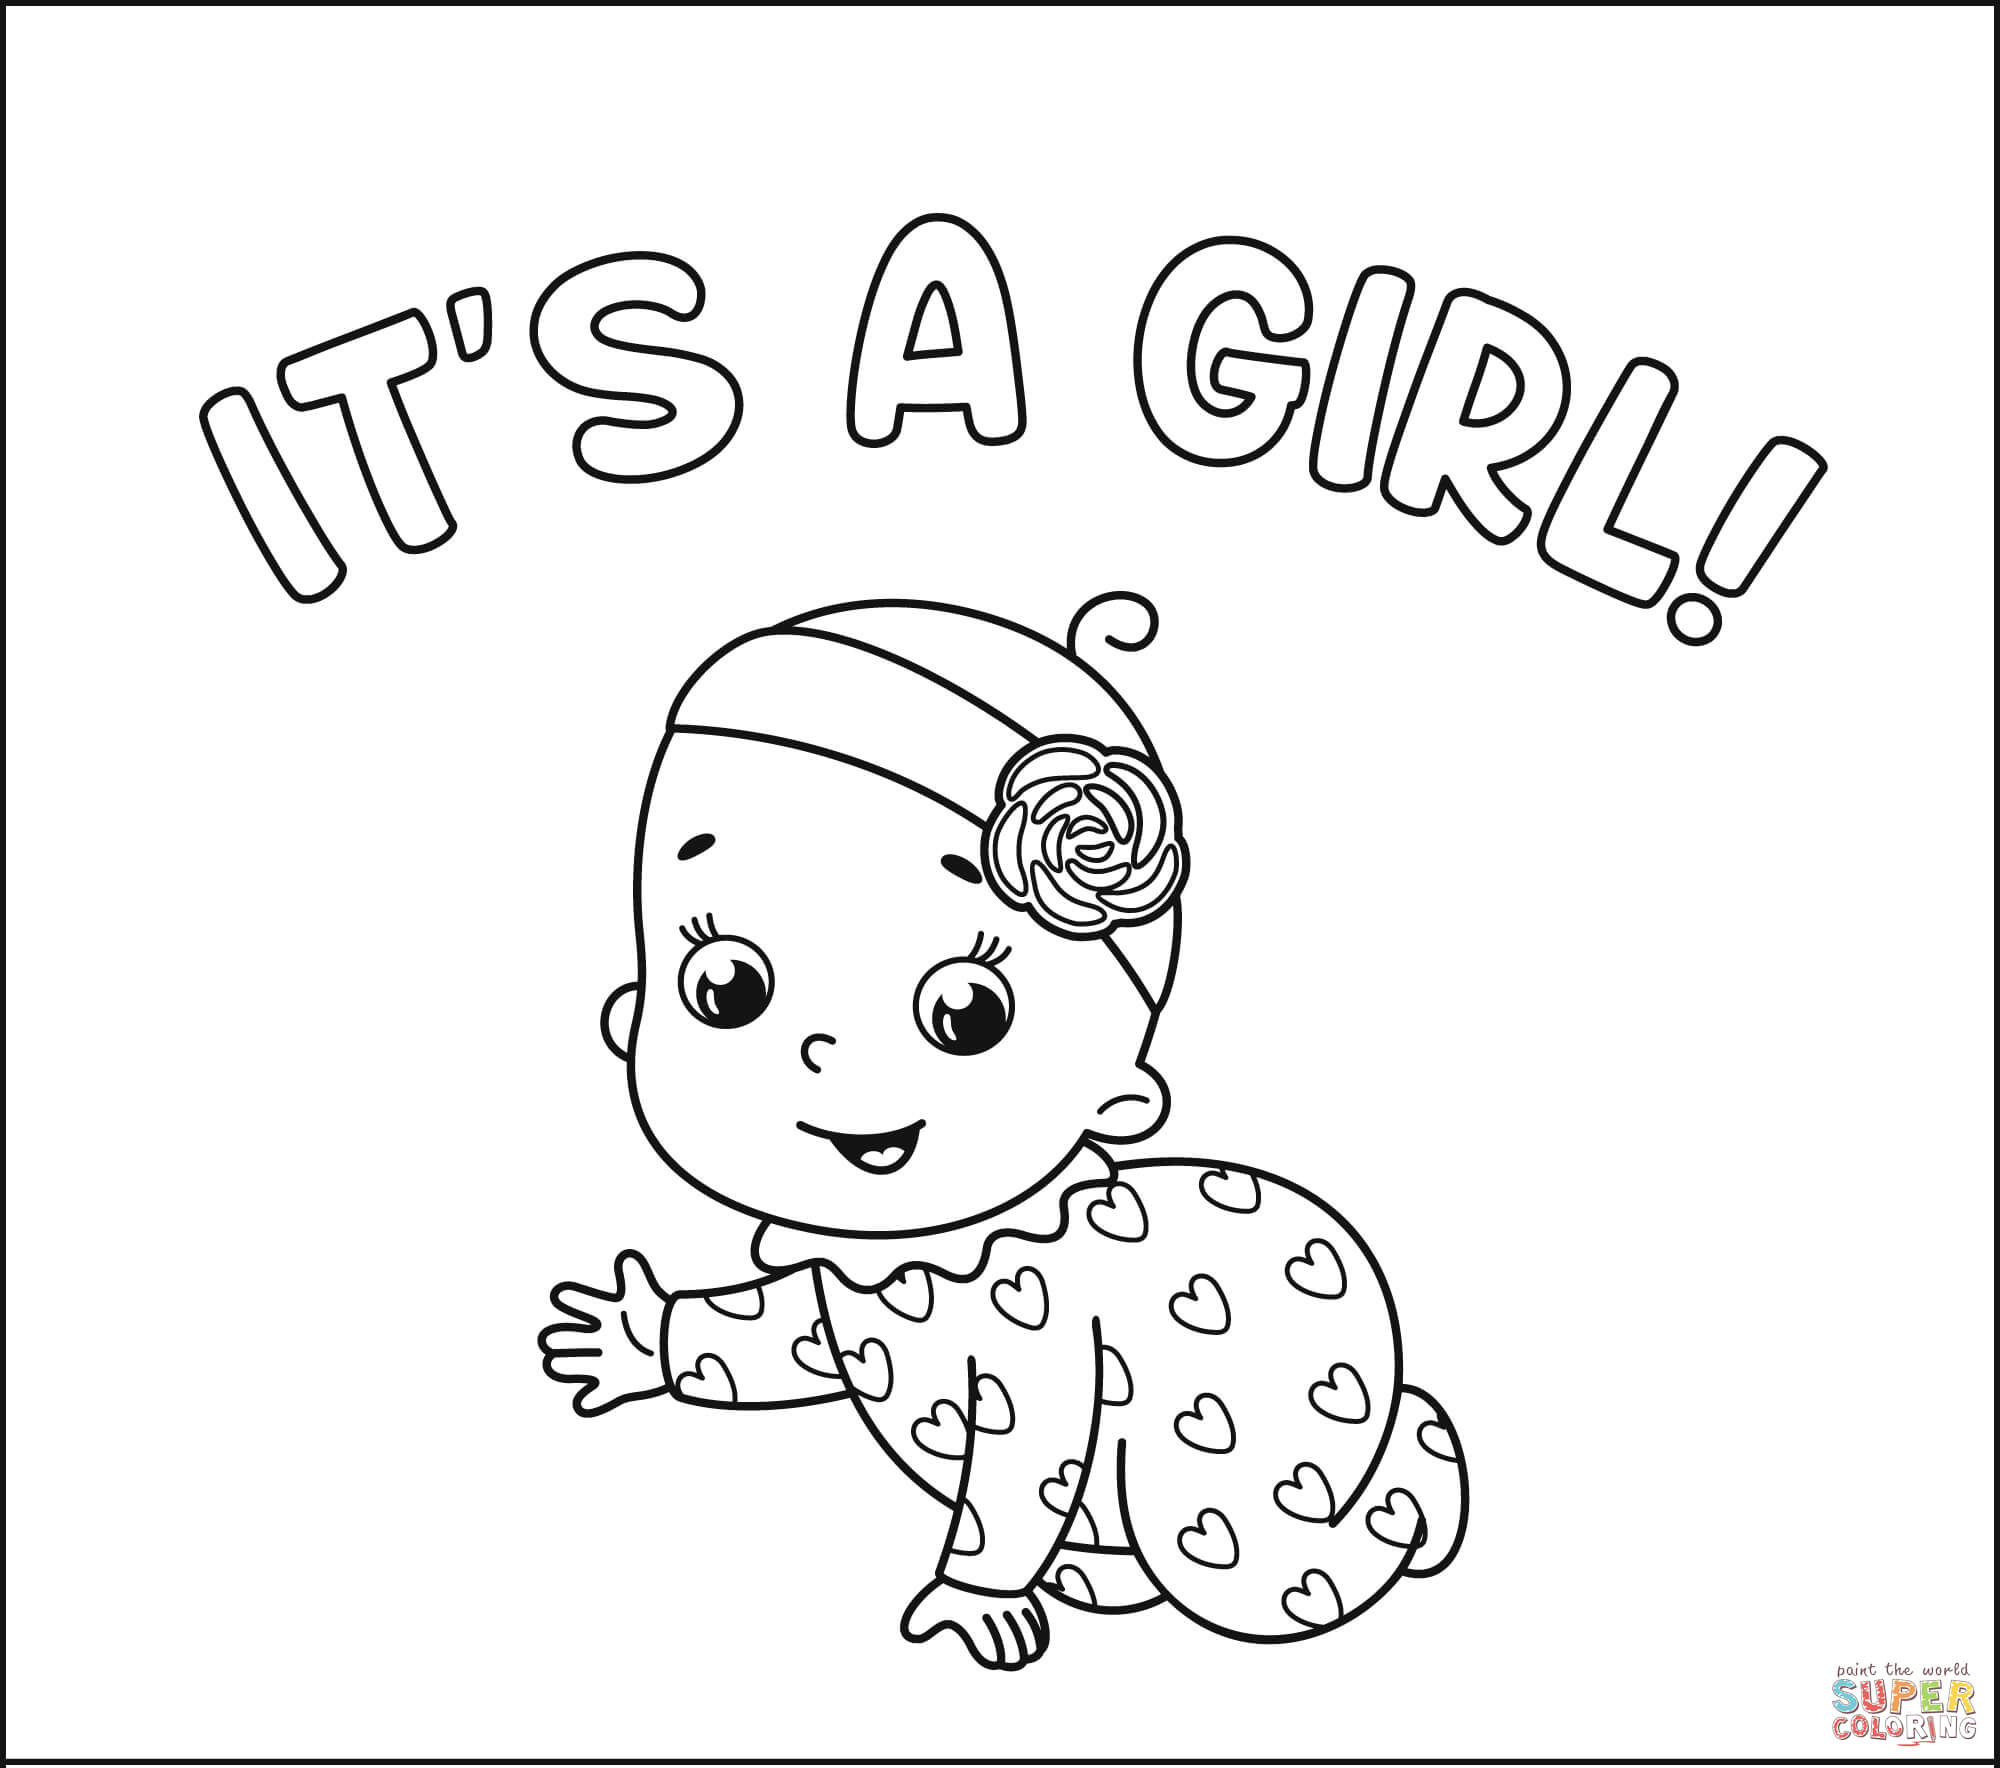 It's A Girl Coloring Page   Free Printable Coloring Pages ...